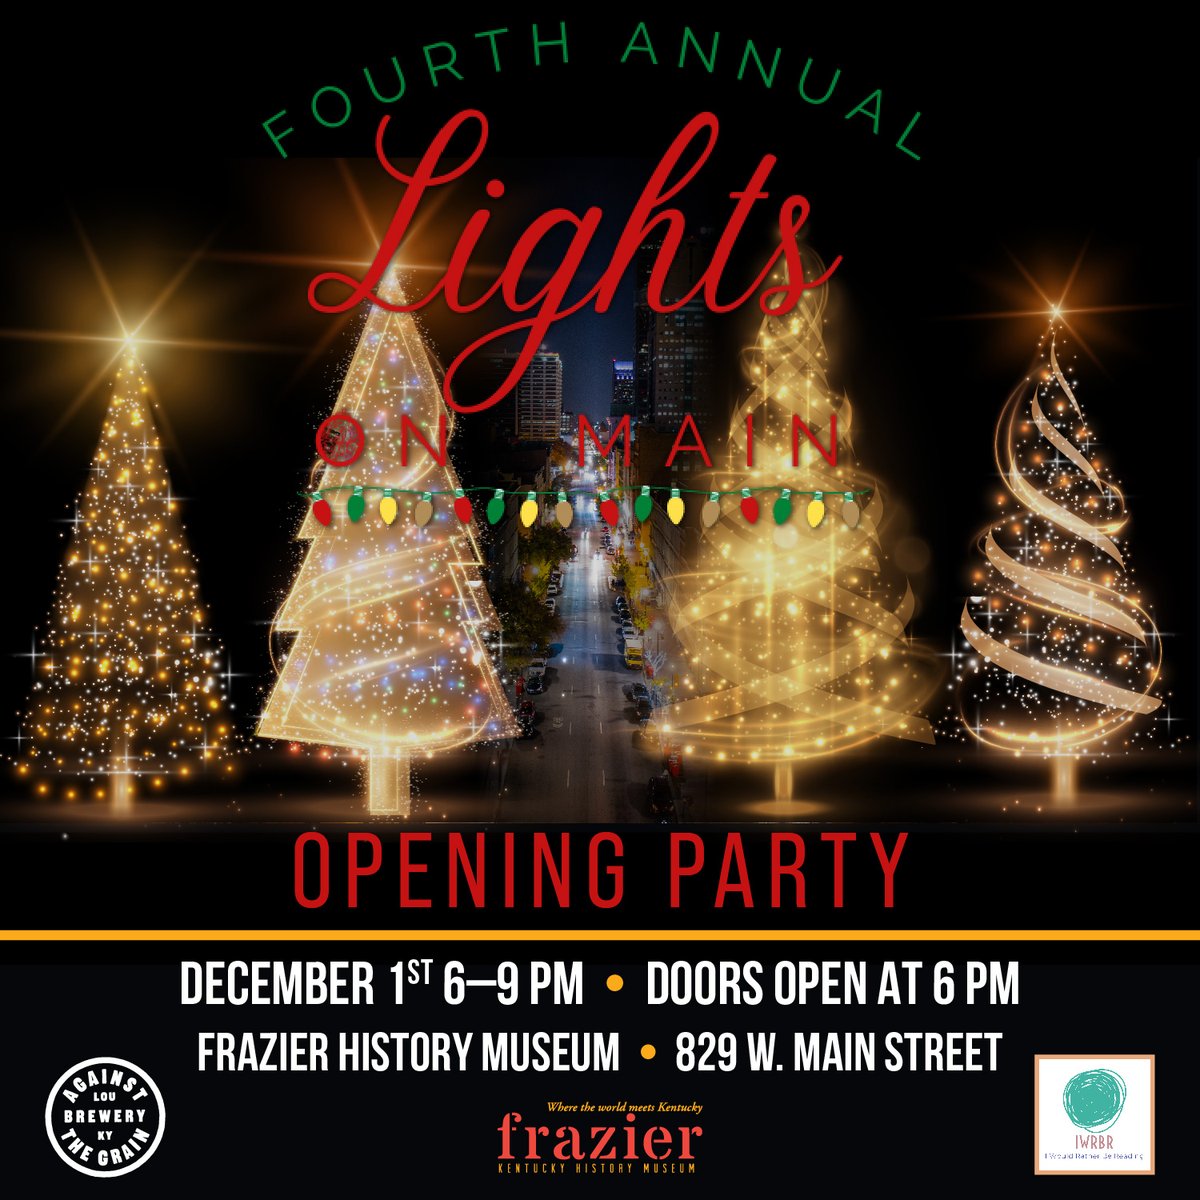 Step into a winter wonderland at the Frazier’s Lights on Main Opening Party on December 1st! See an enchanted holiday forest with trees beautifully decorated as we celebrate with food from Against the Grain, drinks, music, & joy! Get tickets now! bit.ly/40yI5nR